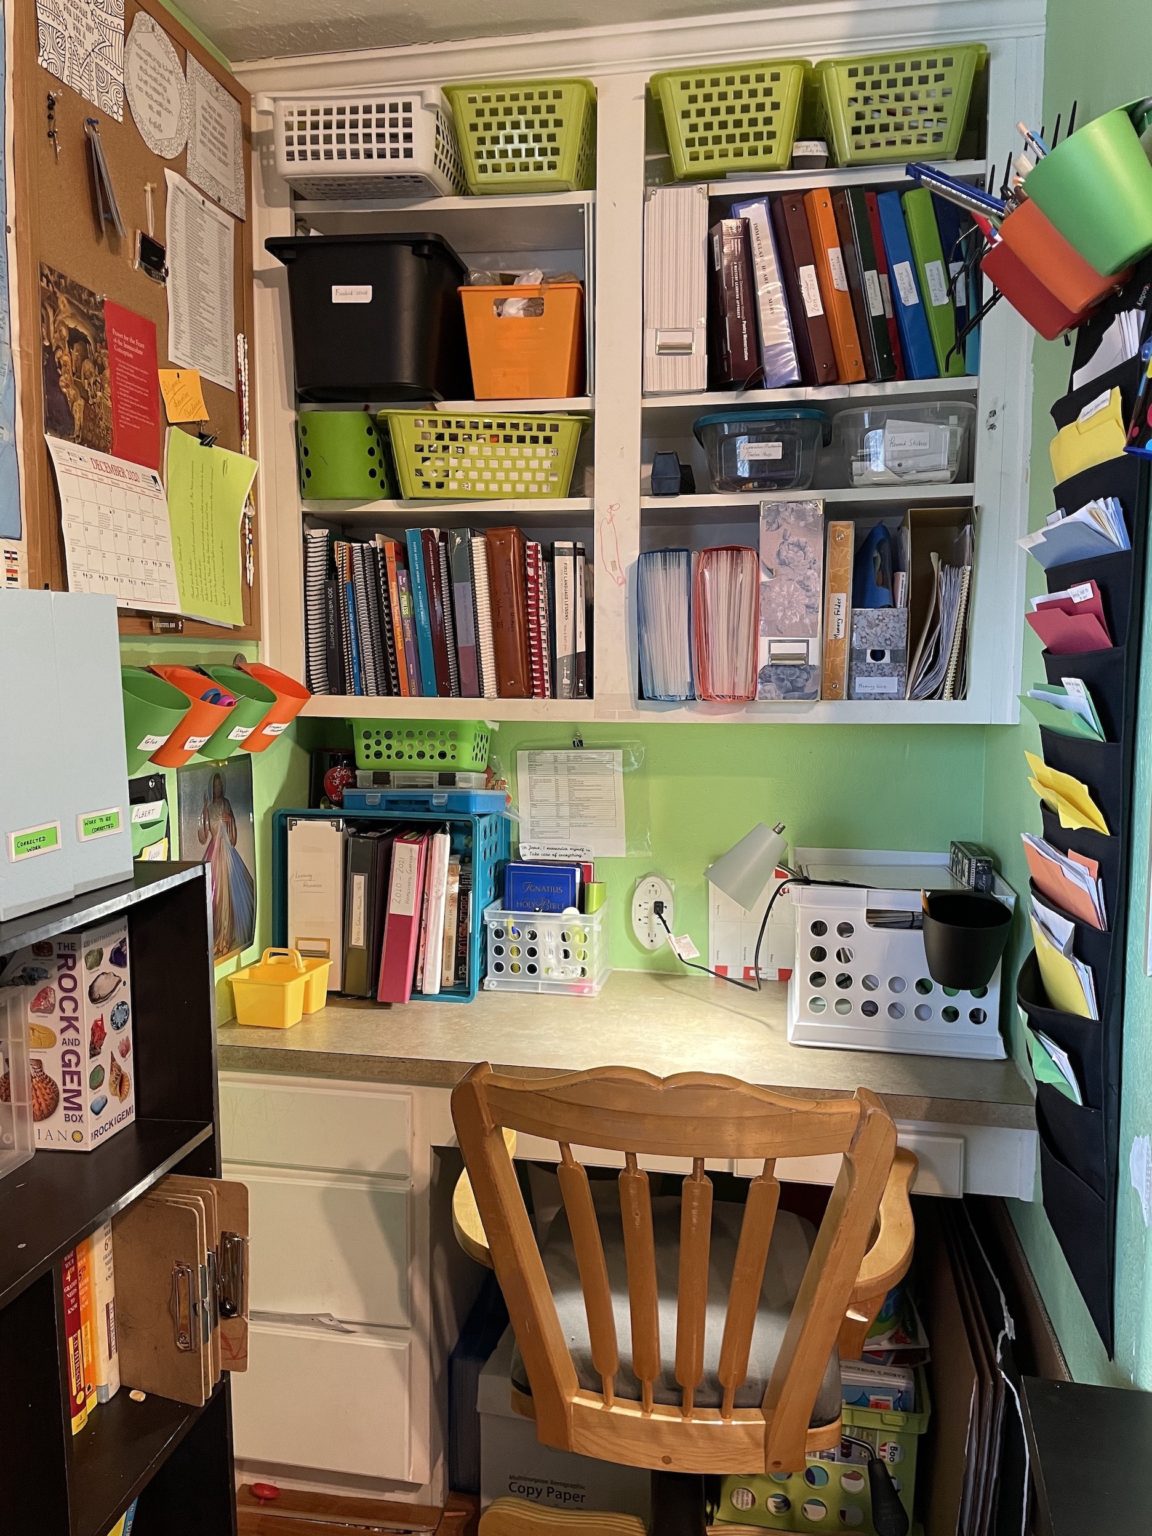 My teachers desk, close to the toddlers bench area. The wall organiser on the right side is where I keep printouts of upcoming weeks, and other activities that I print out. I also keep any corrected work I need to go over with anyone, there. 